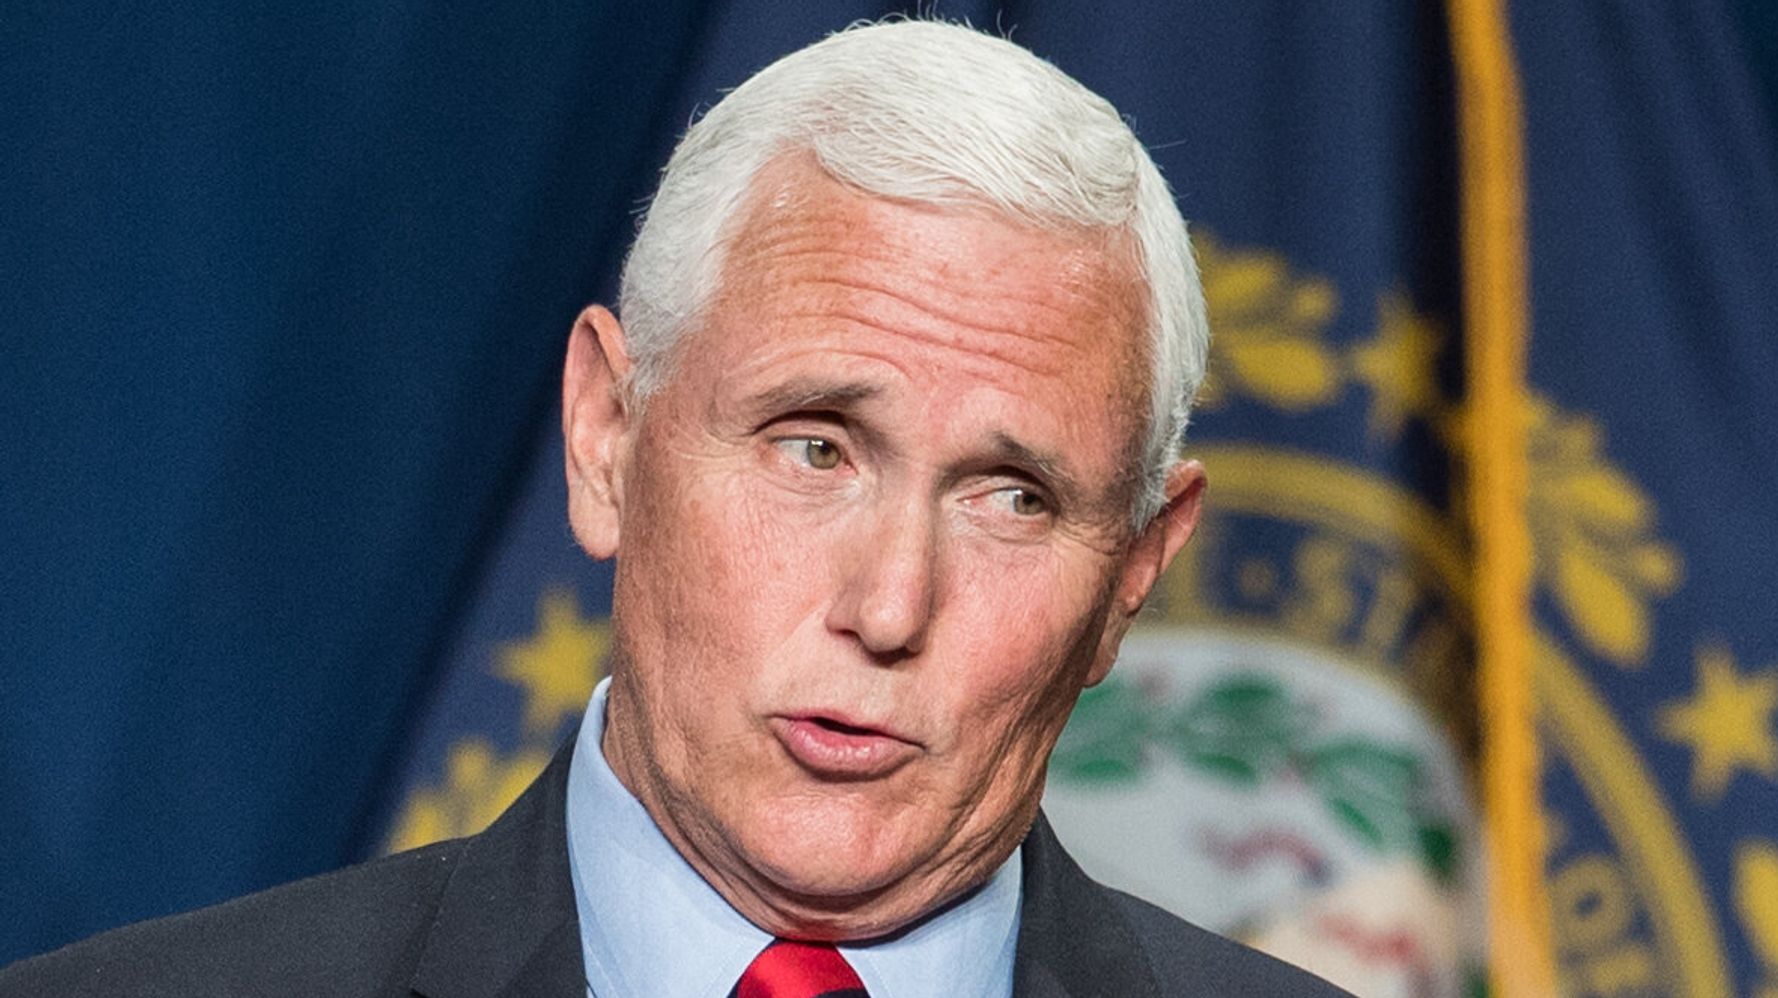 Mike Pence's 'Cancel Culture' Rallying Cry Is Too Much For Folks On Twitter